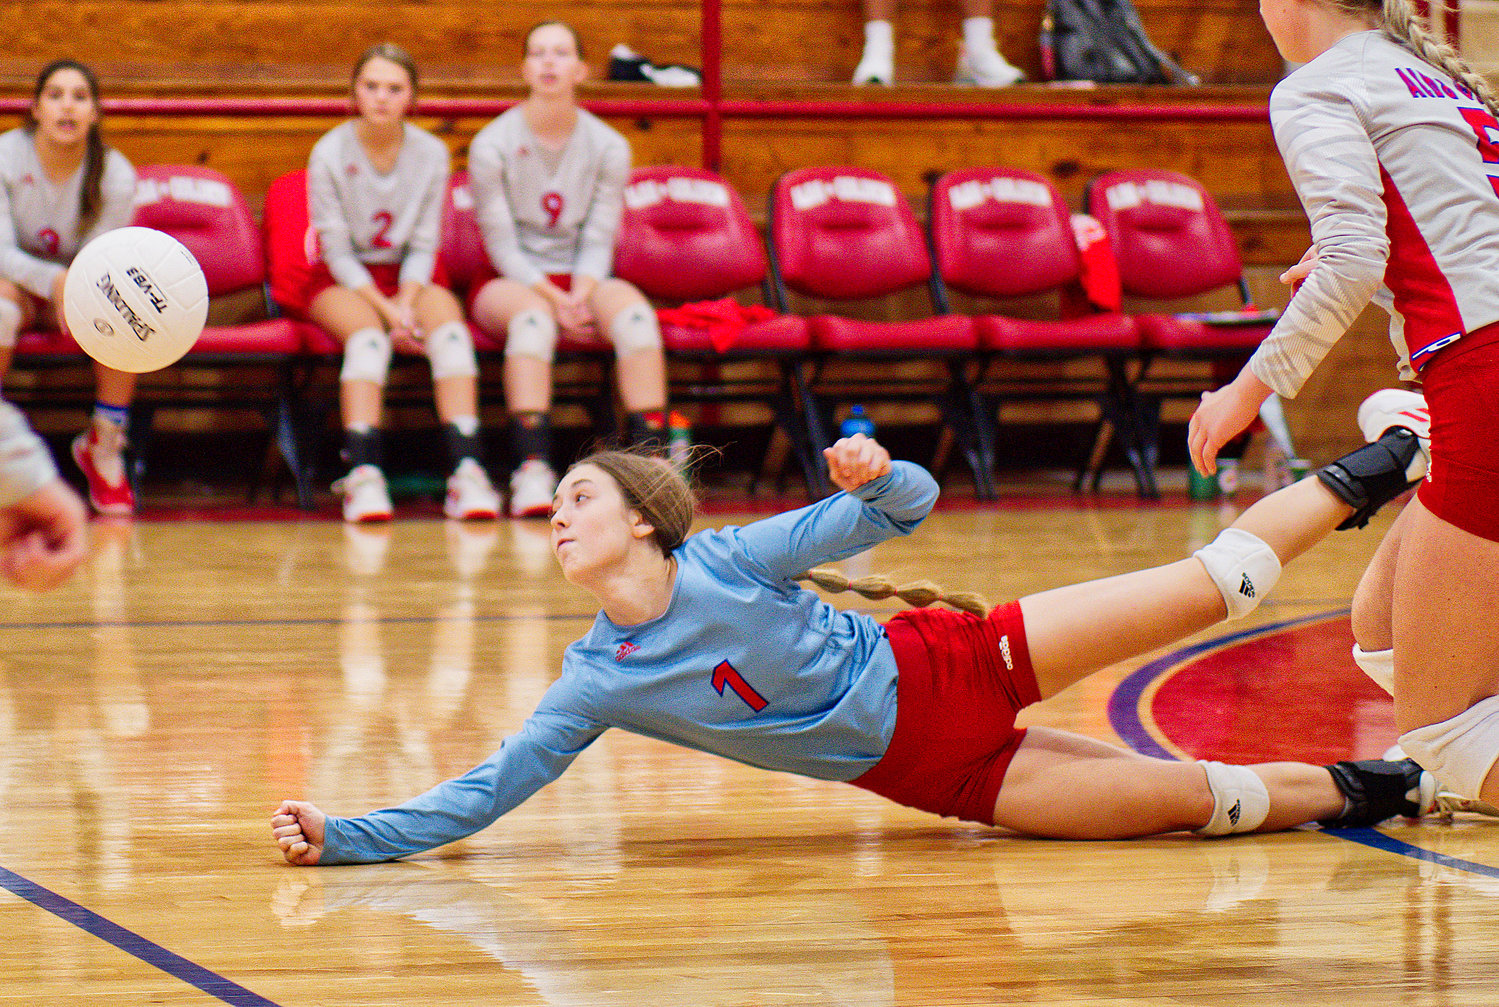 Kamrin Wright dives to save the ball for Alba-Golden in last week’s win over Winona.  [view more volleyball shots]